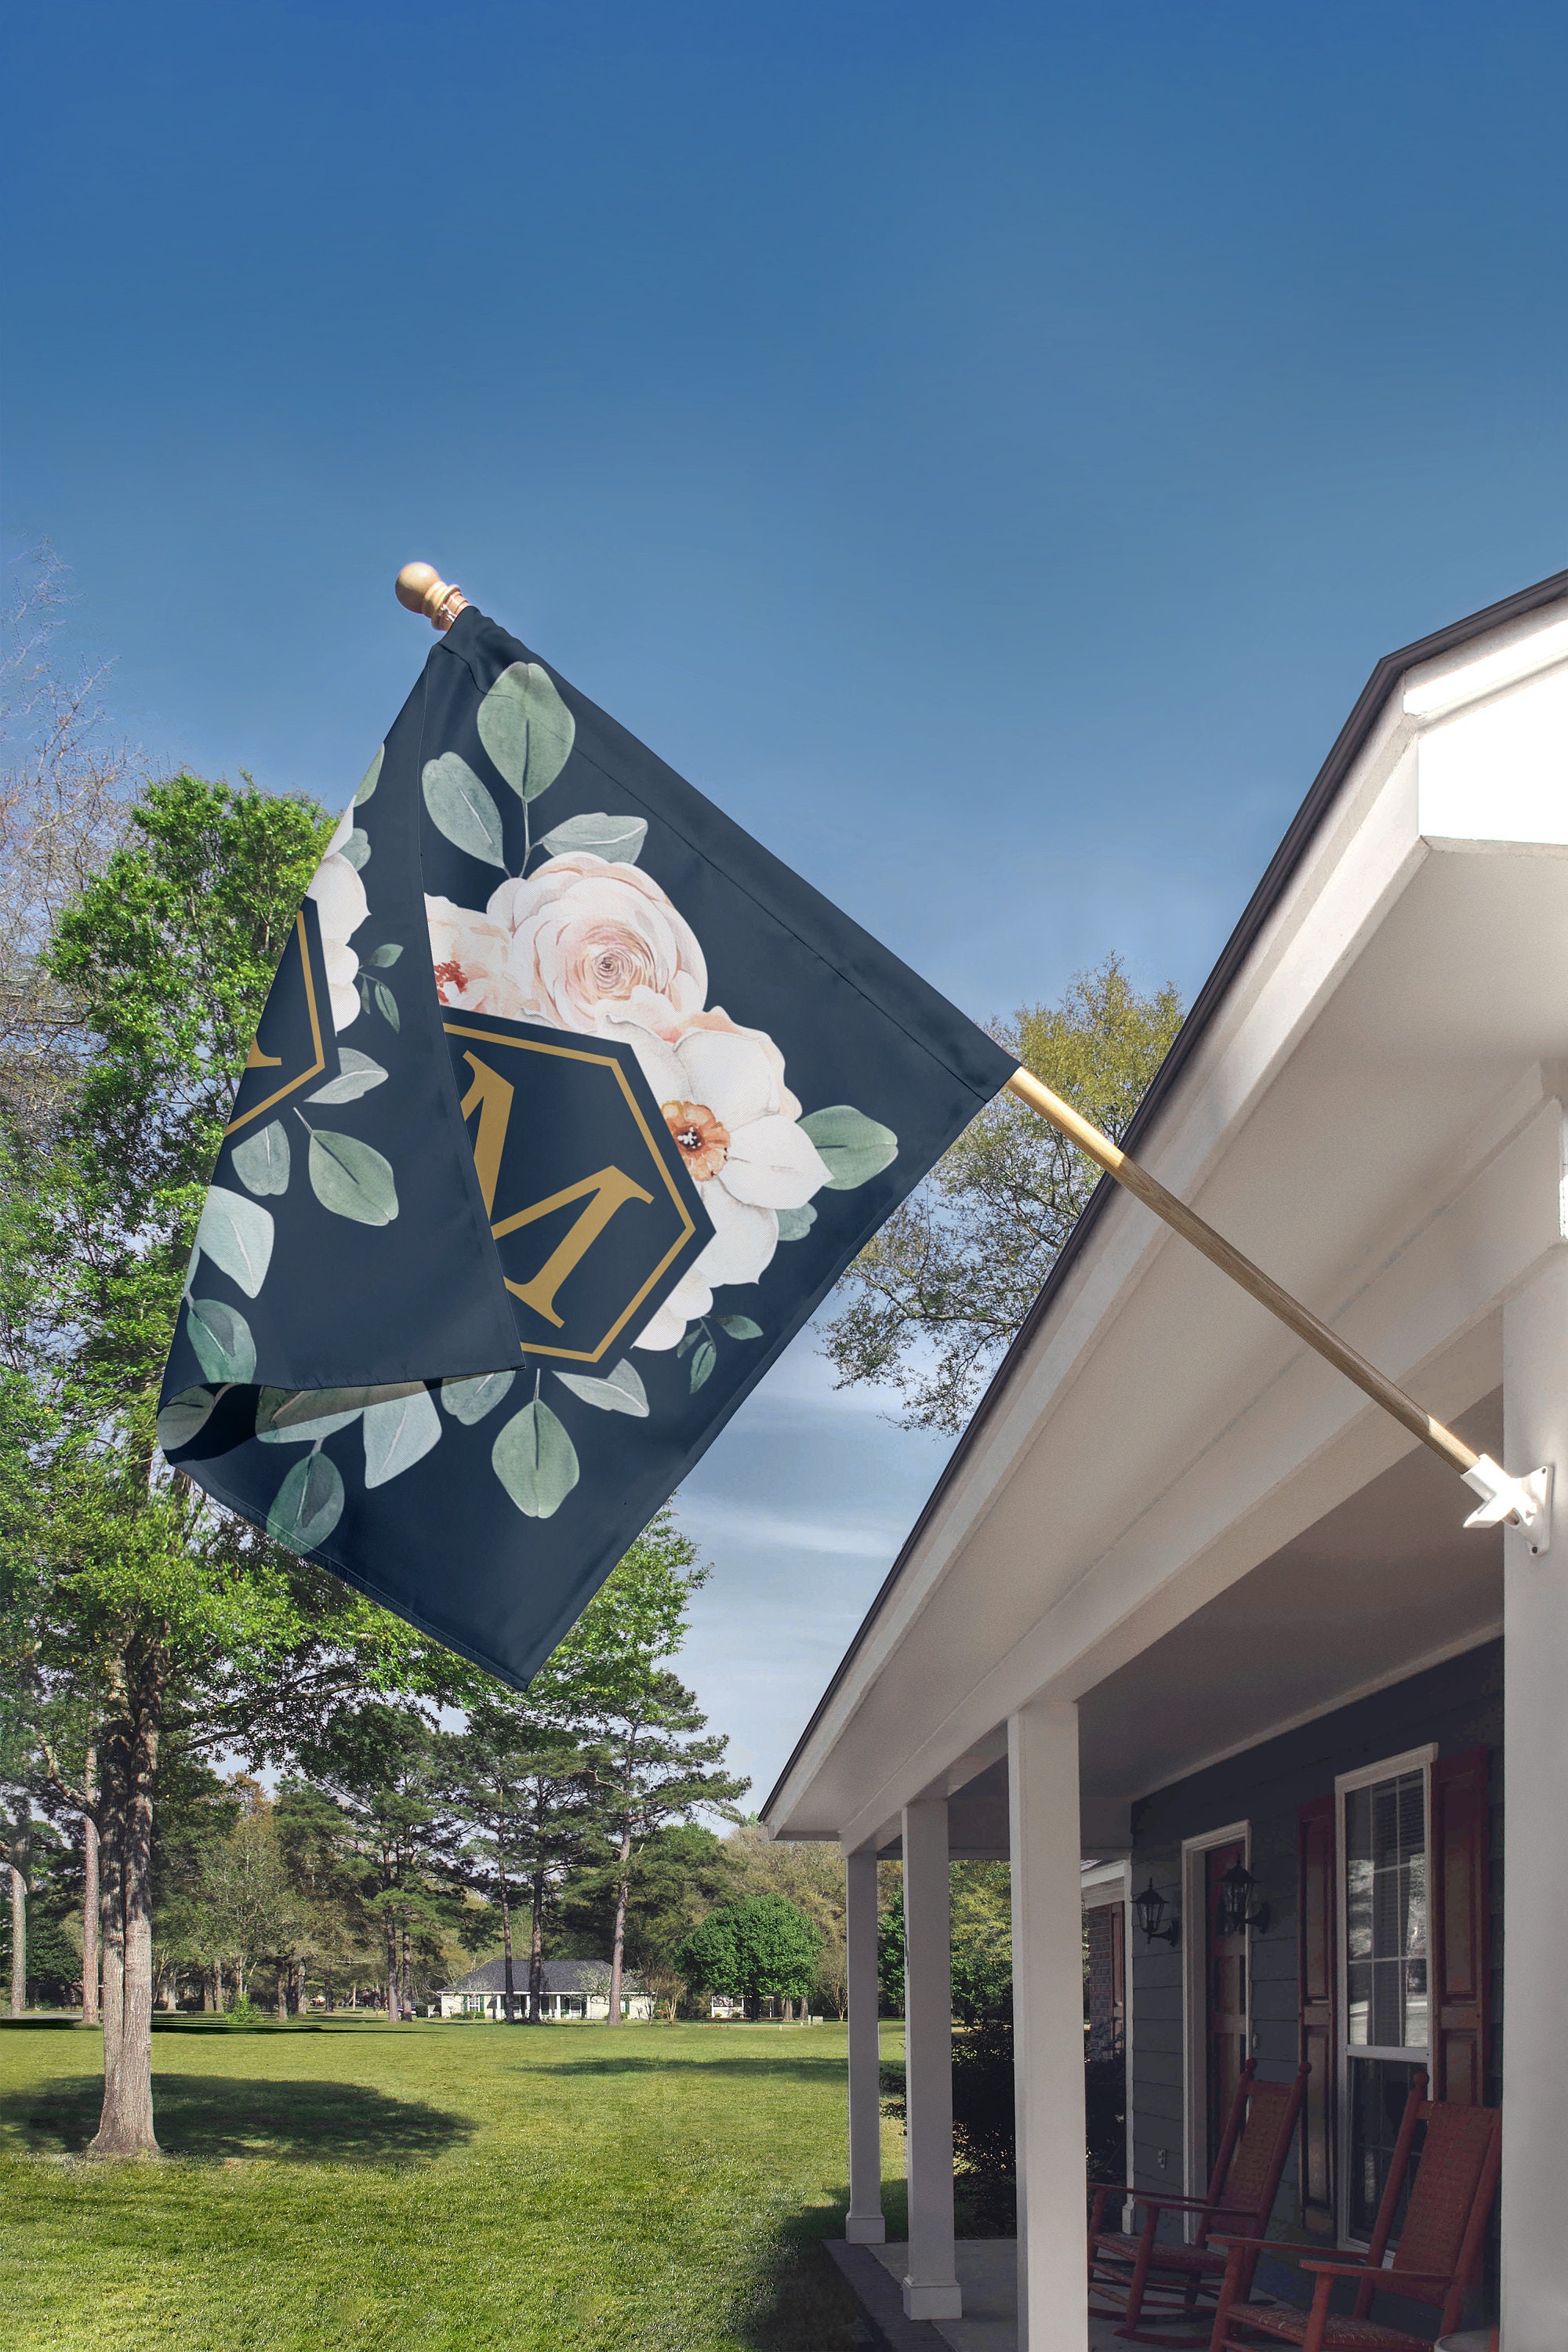 Personalized monogram house flags